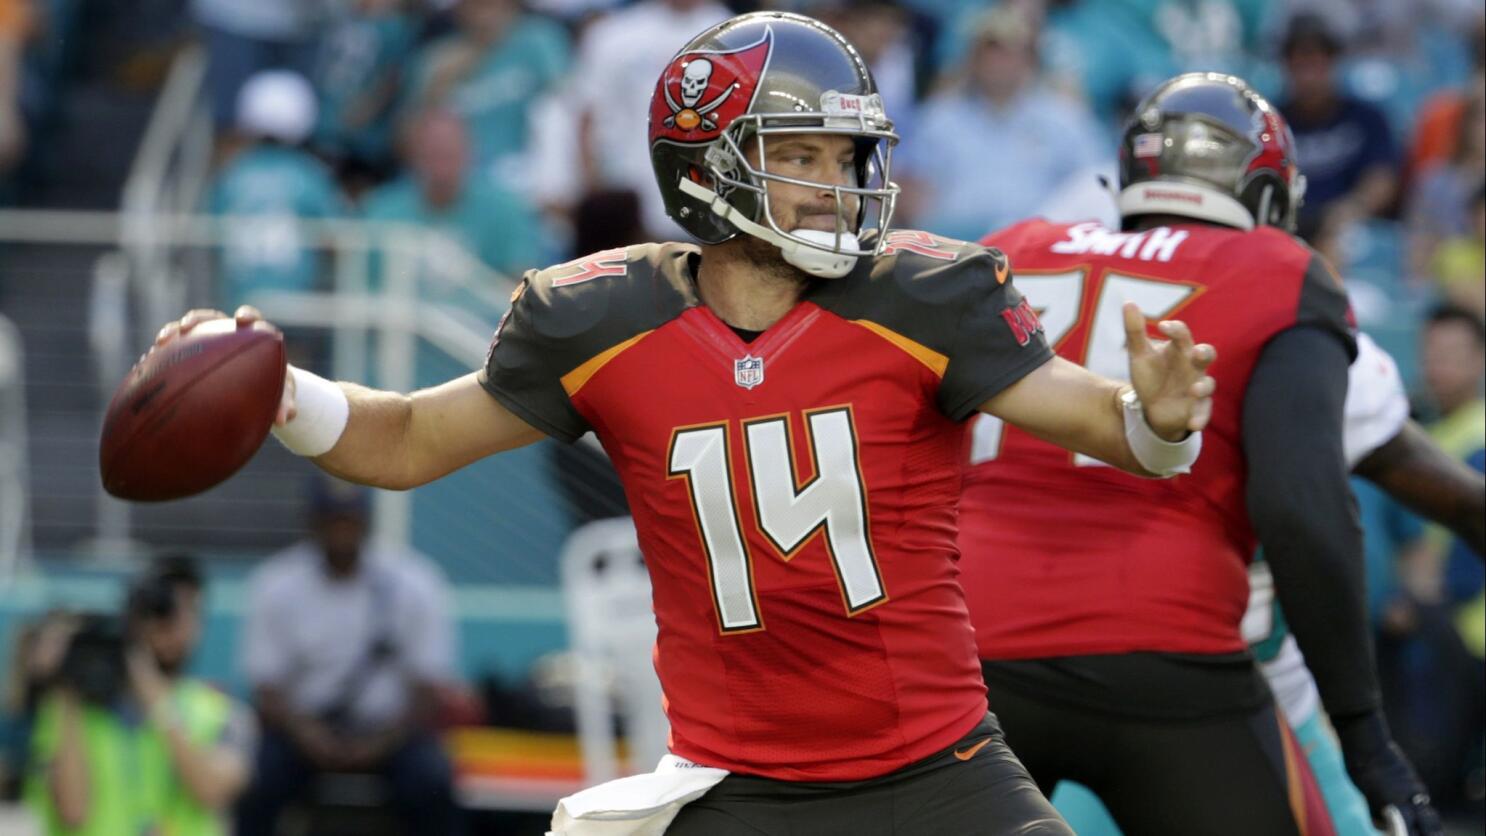 NFC South preview: Fitzpatrick's journey includes starter's role